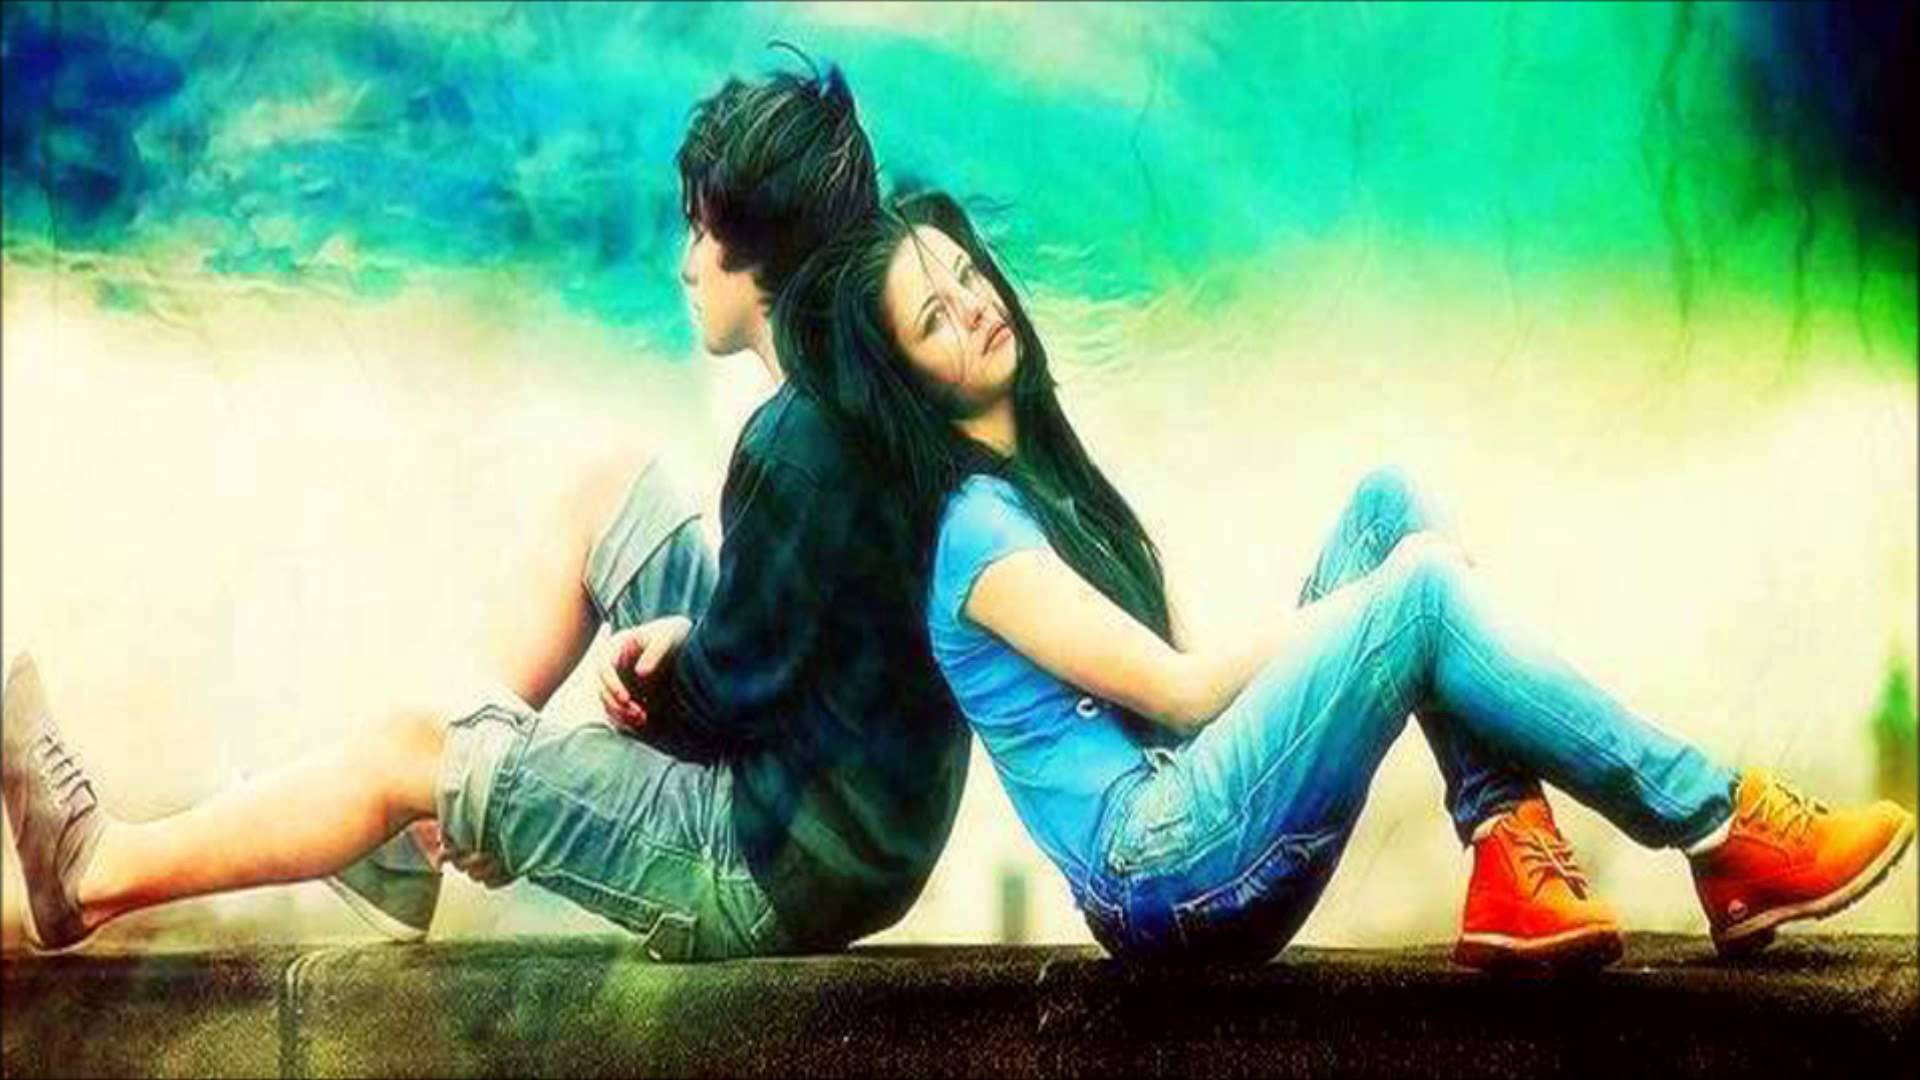 aashiqui 2 images for facebook cover page